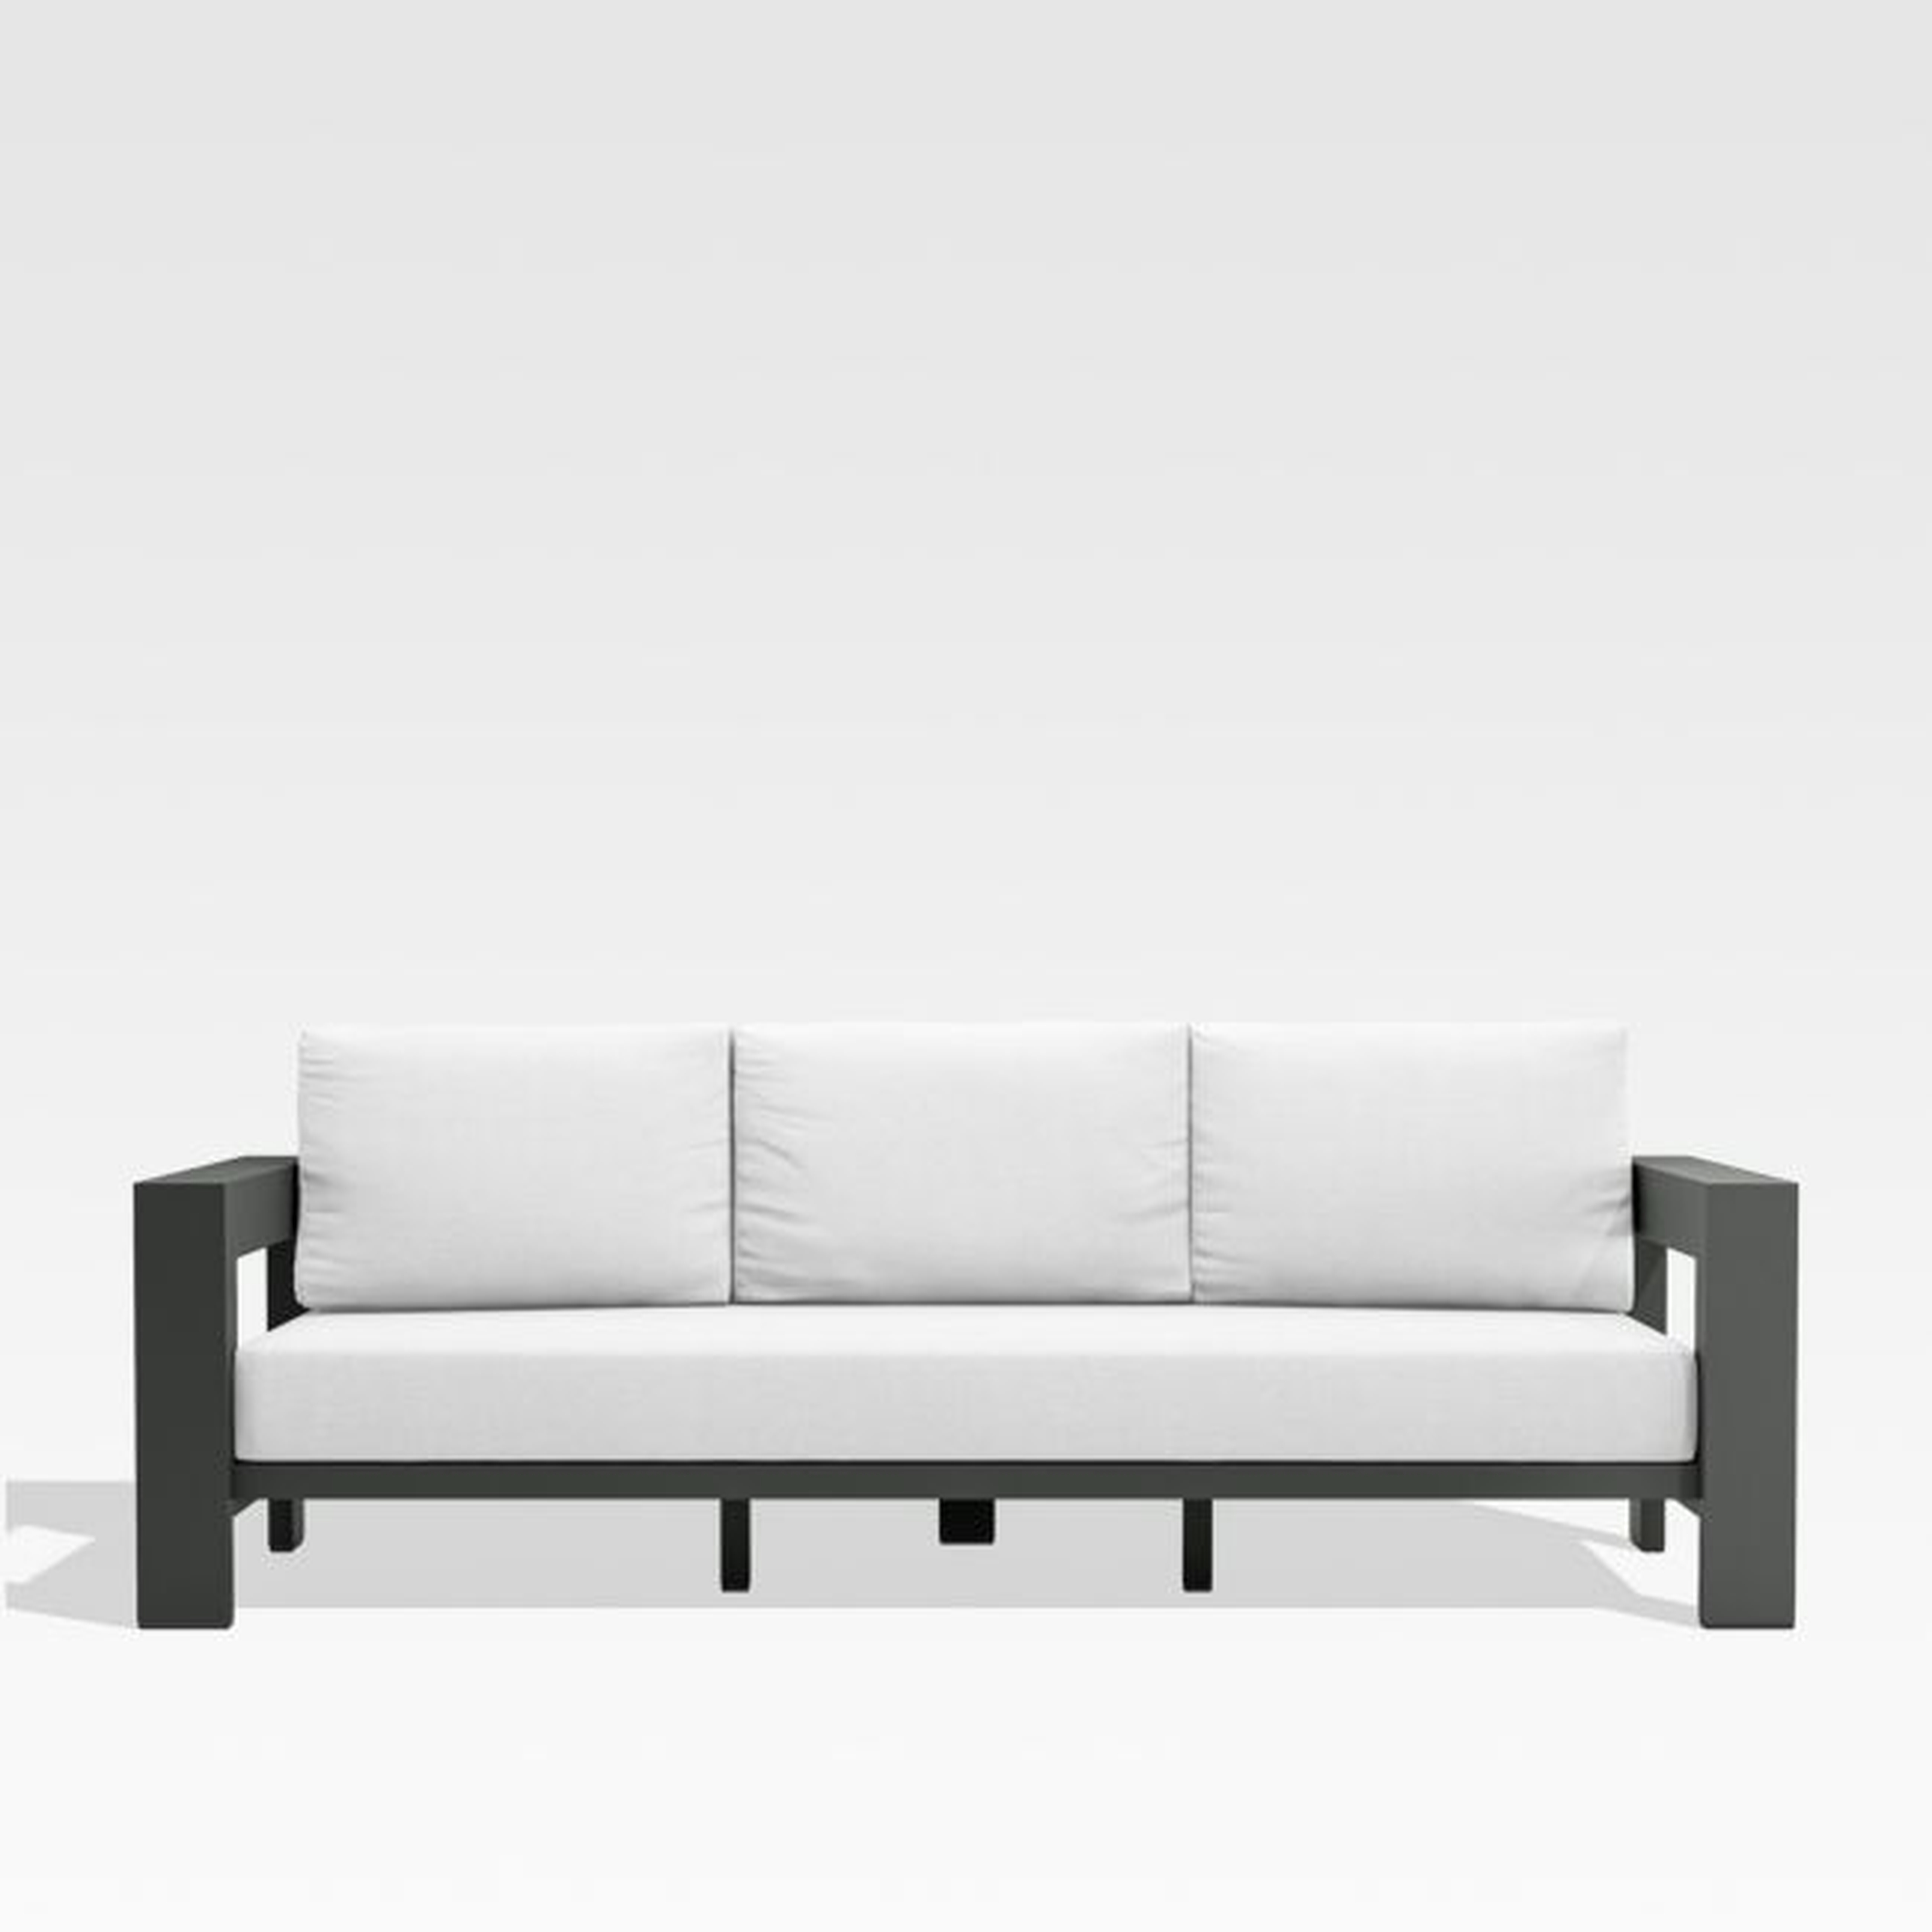 Walker 90" Metal Outdoor Sofa with White Sunbrella ® Cushions - Crate and Barrel